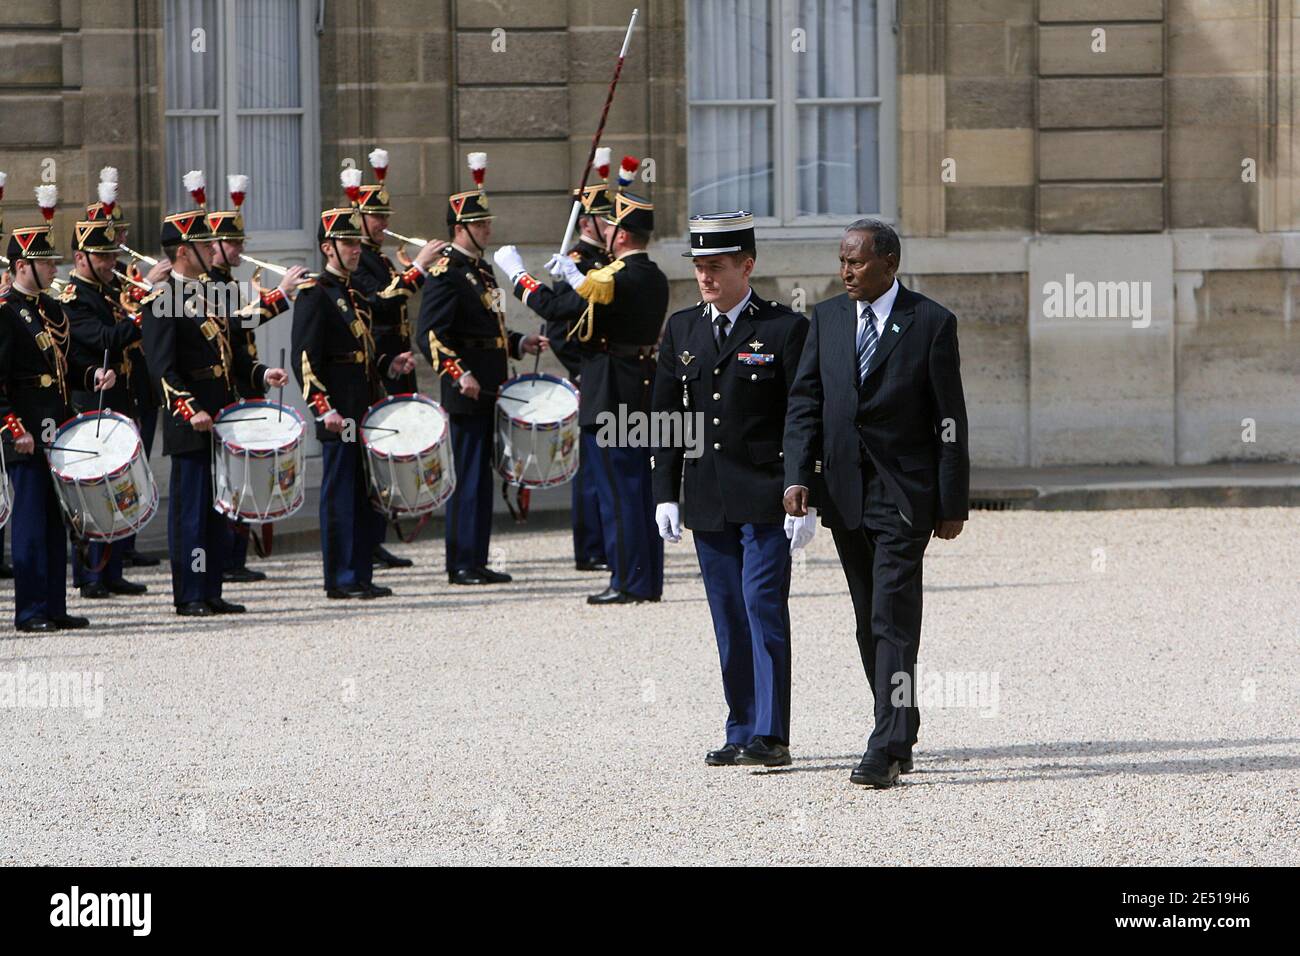 Somalia's President Abdullahi Yusuf Ahmed arrives at the Elysee Palace in Paris May 5, 2008. Photo by Mousse/ABACAPRESS.COM Stock Photo